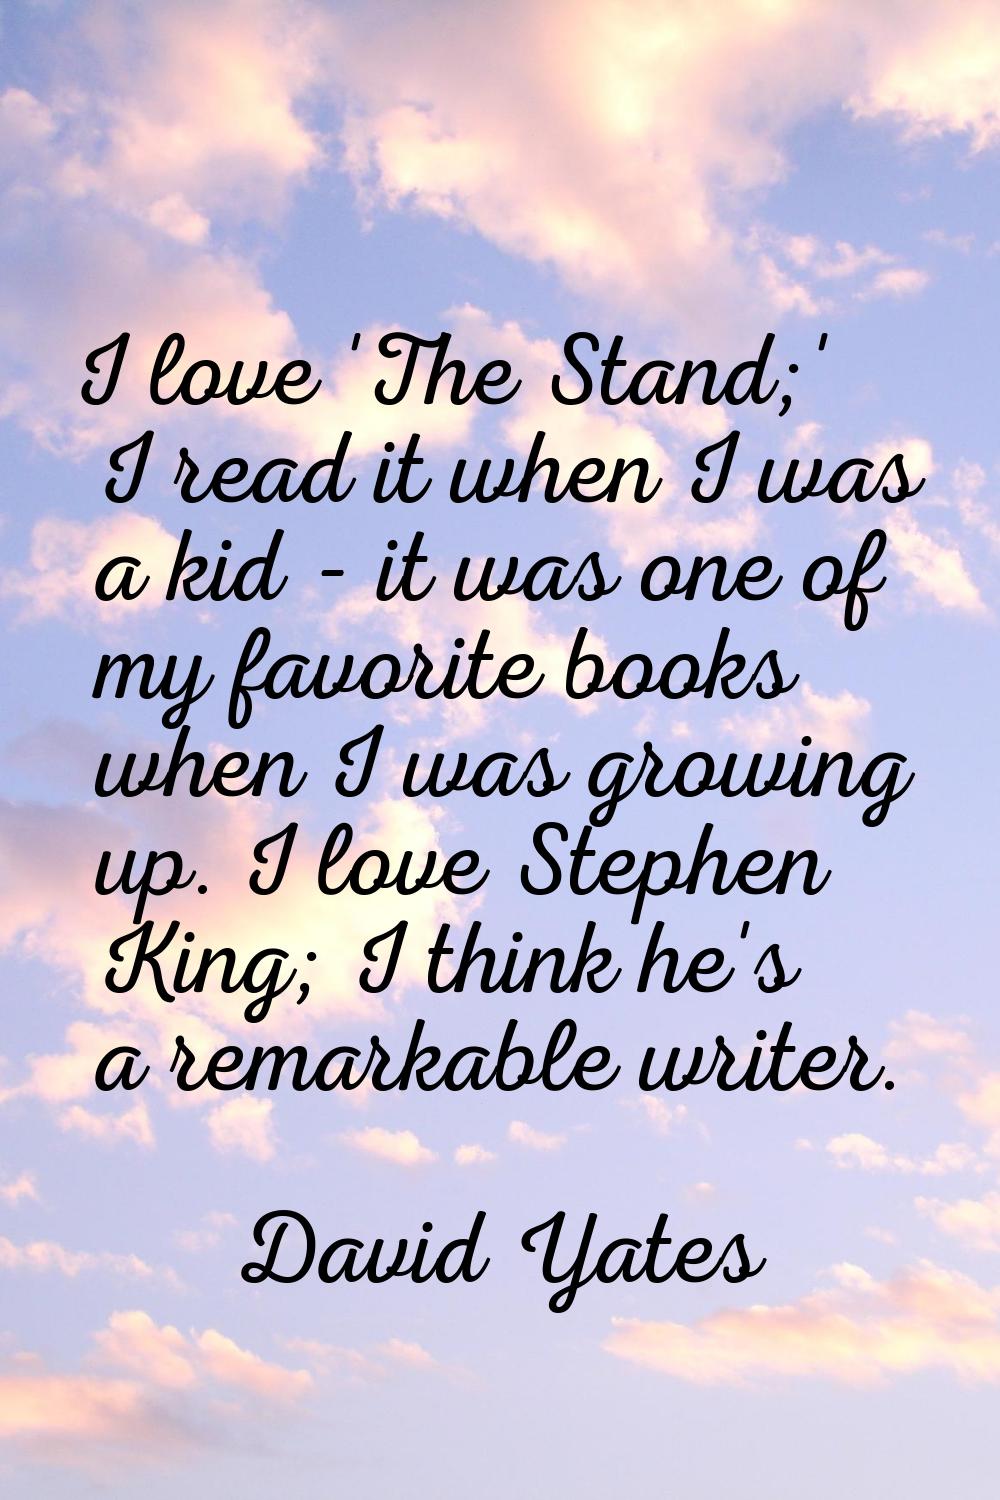 I love 'The Stand;' I read it when I was a kid - it was one of my favorite books when I was growing